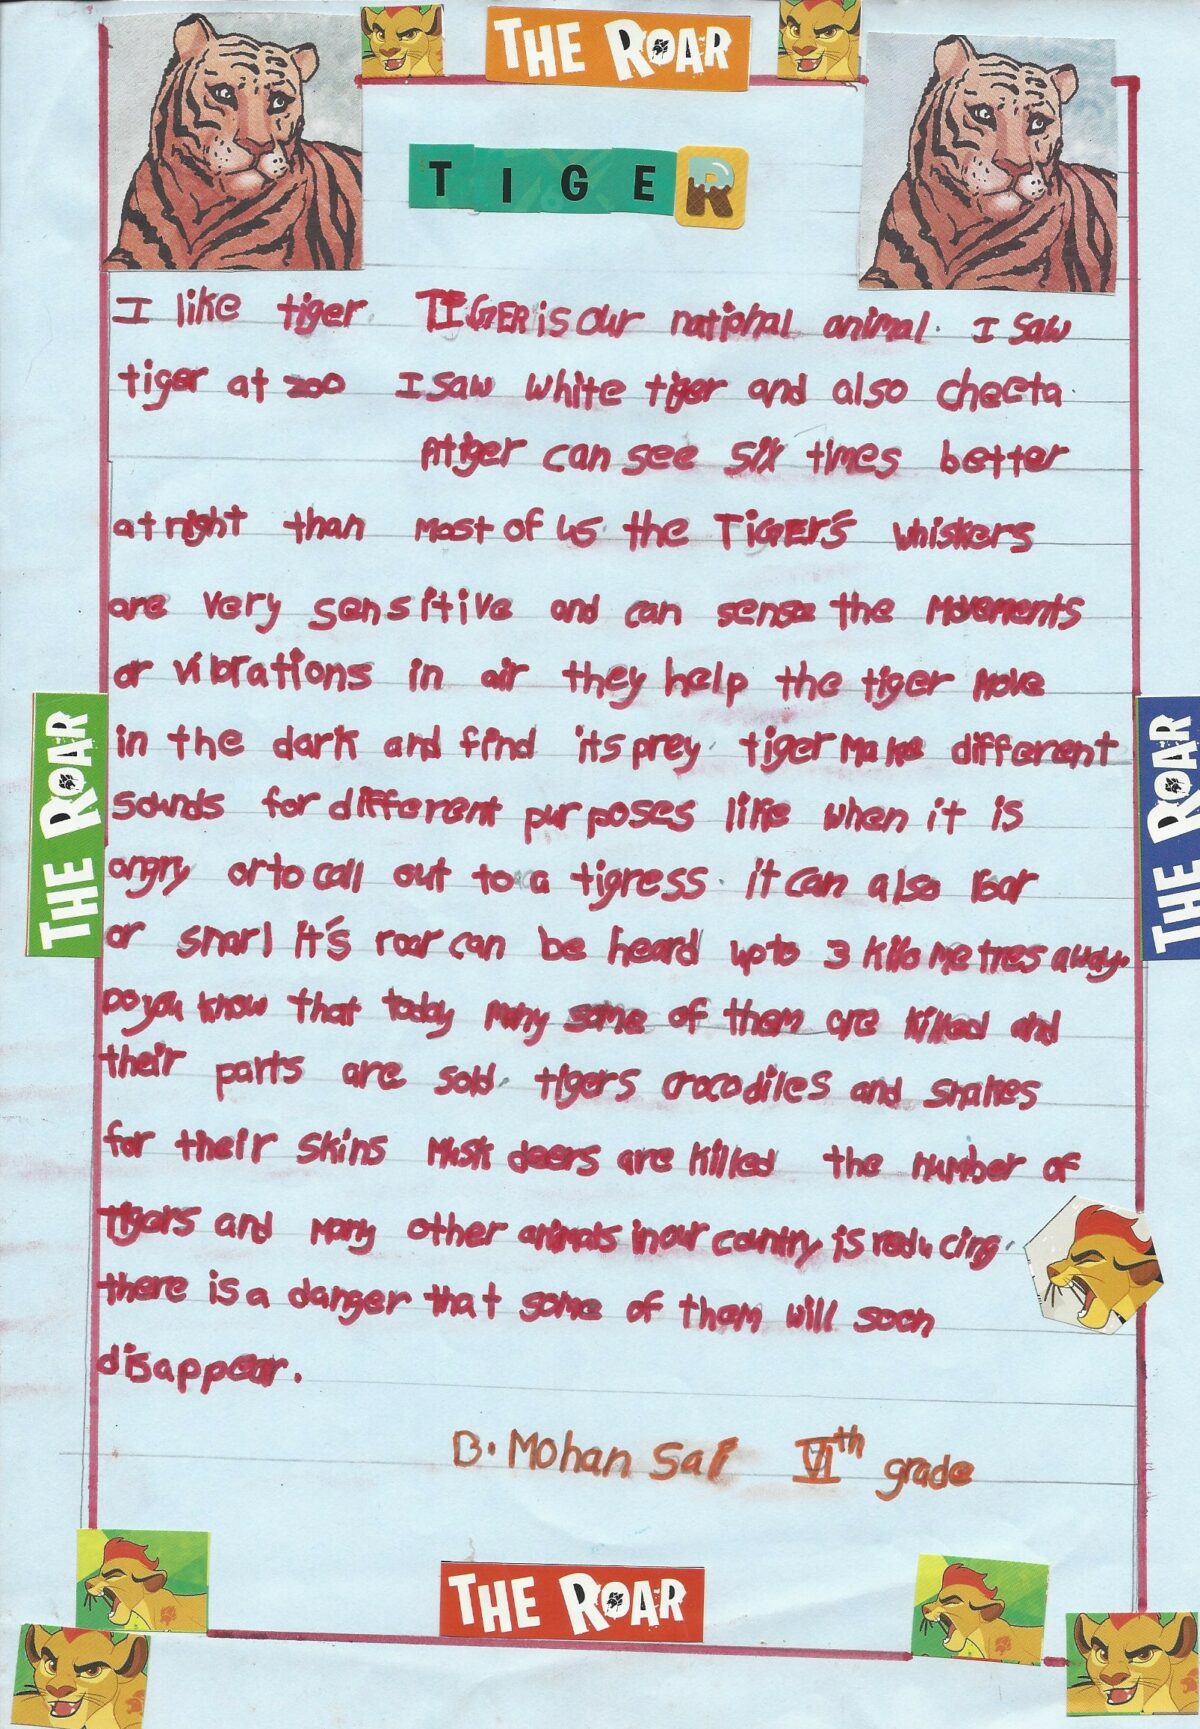 A writing sample by young boy at Children of Faith School in India about Tigers